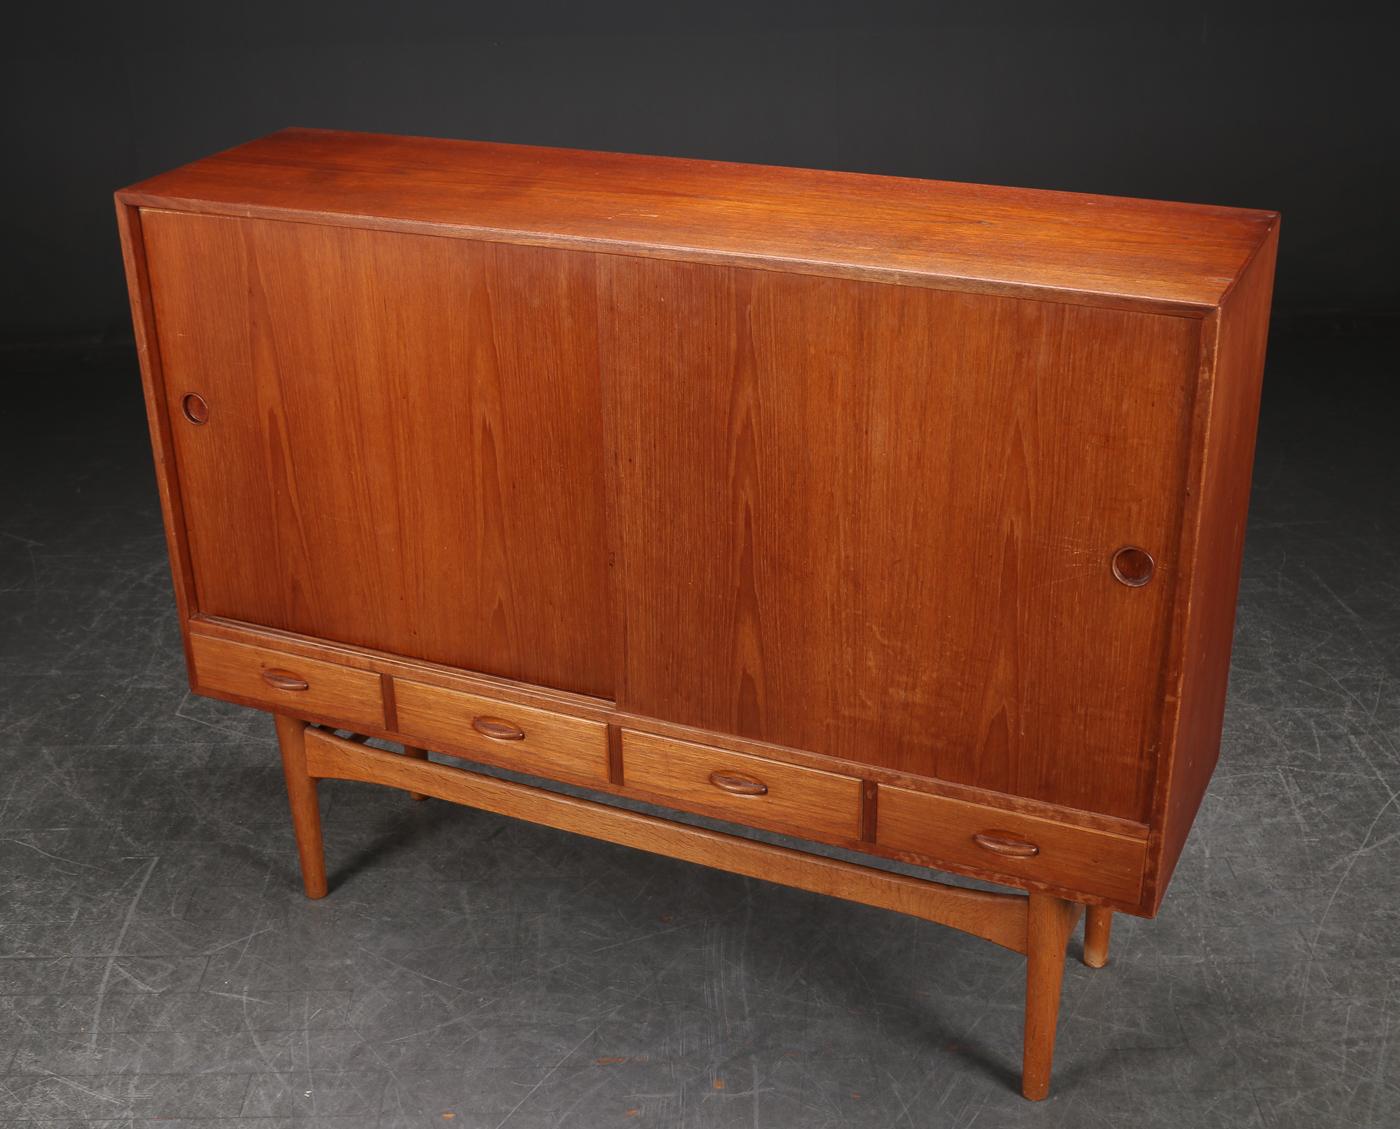 Origin: Denmark
Designer: Ejvind A. Johansson
Manufacturer: Unknown
Era: 1960s
Dimensions: 63? wide x 18? deep x 49.5? tall

Restoration includes:
• Structural + joint repair (if necessary) on all joints
• Full exterior refinish in lacquer